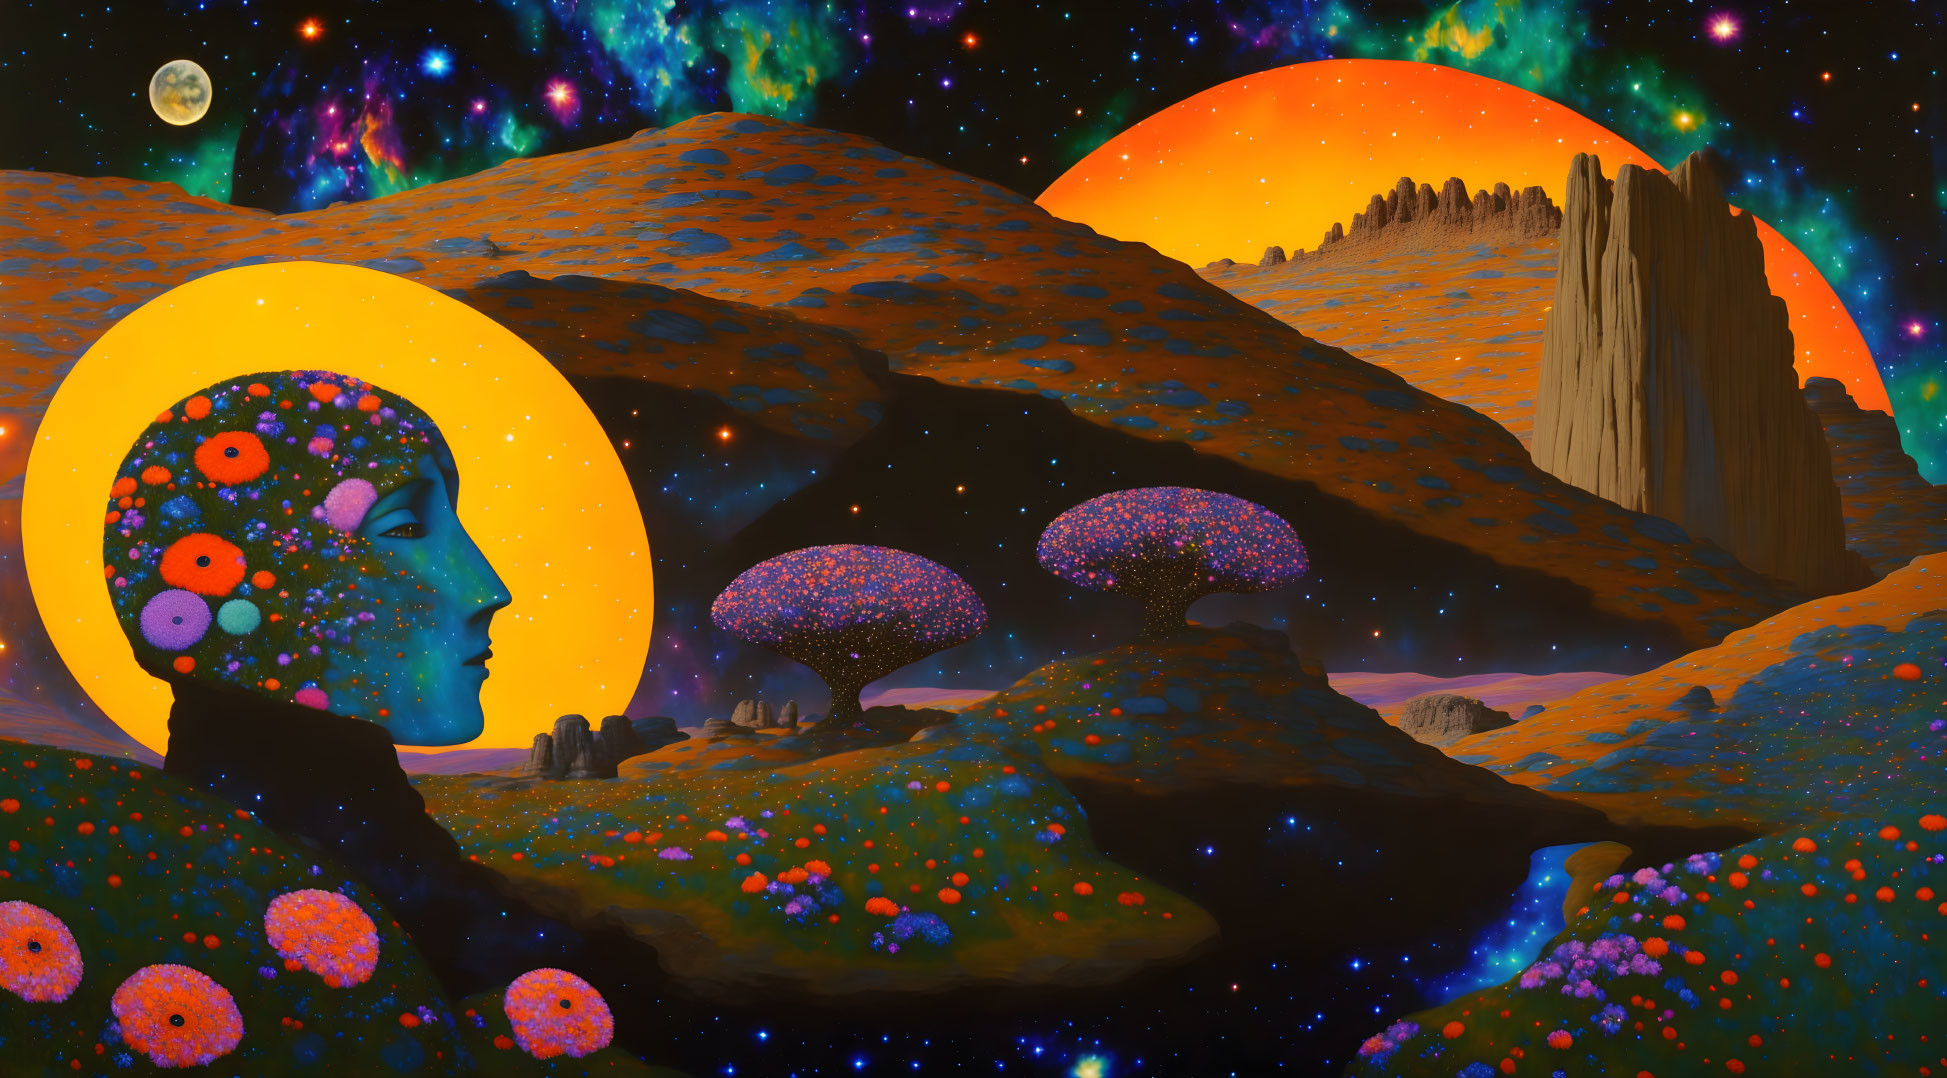 Colorful cosmic landscape with human head silhouette and celestial elements